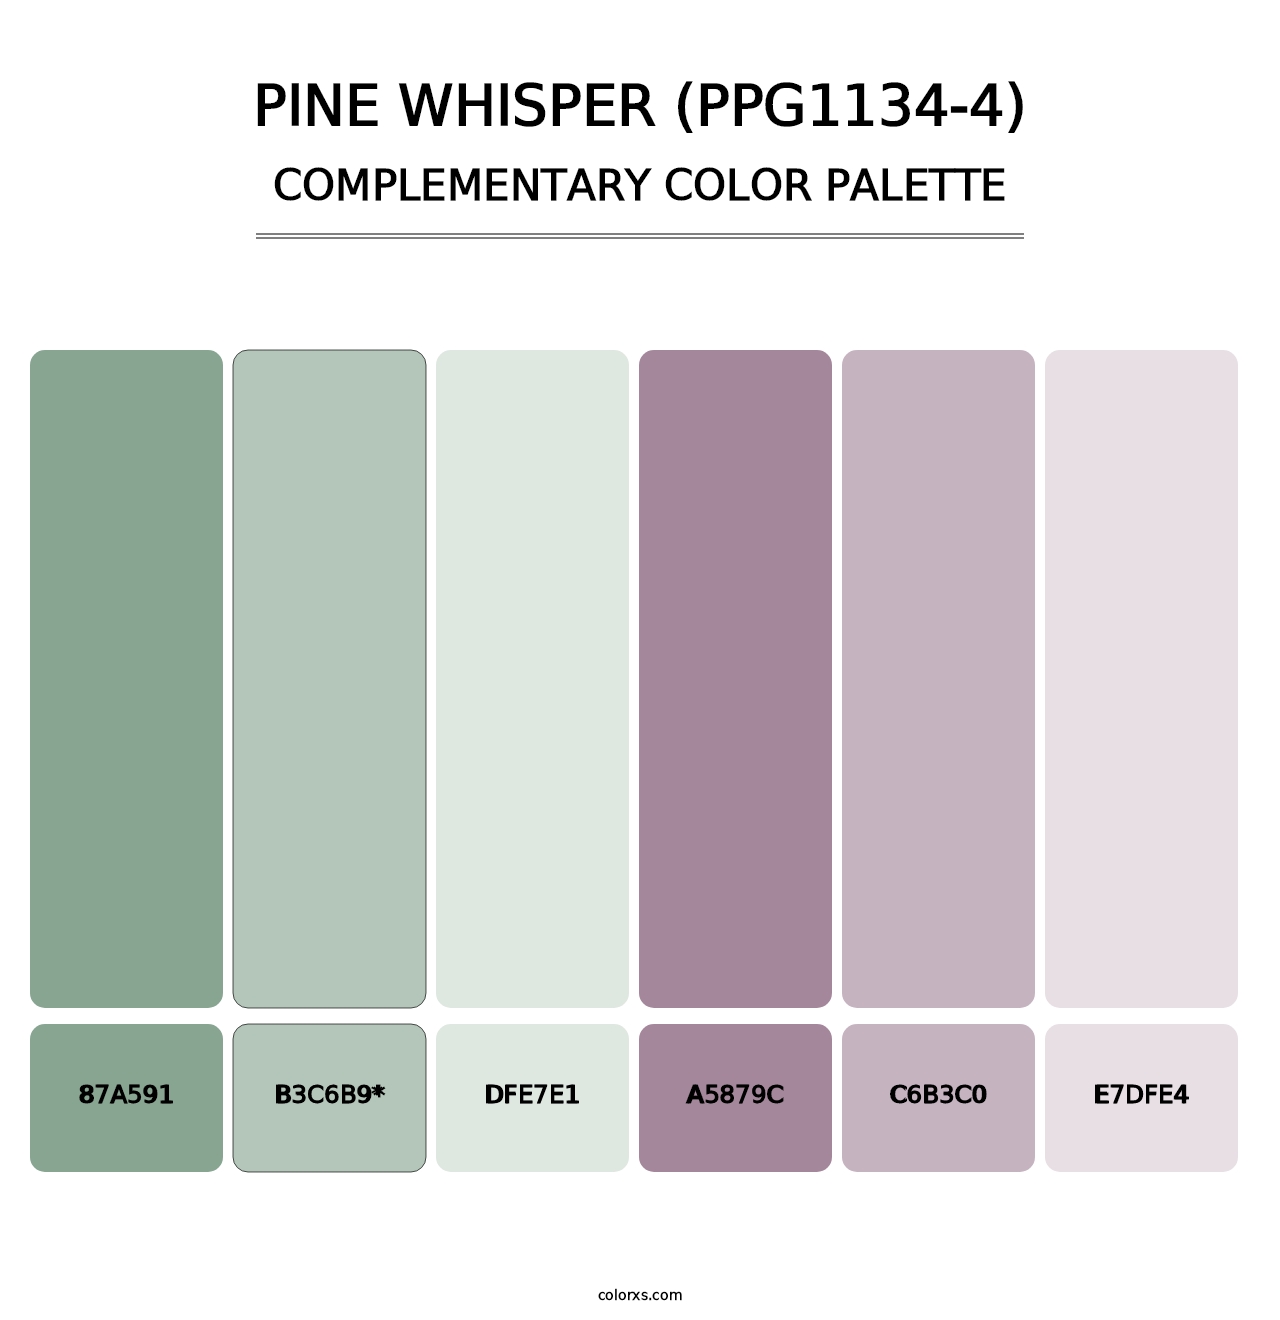 Pine Whisper (PPG1134-4) - Complementary Color Palette